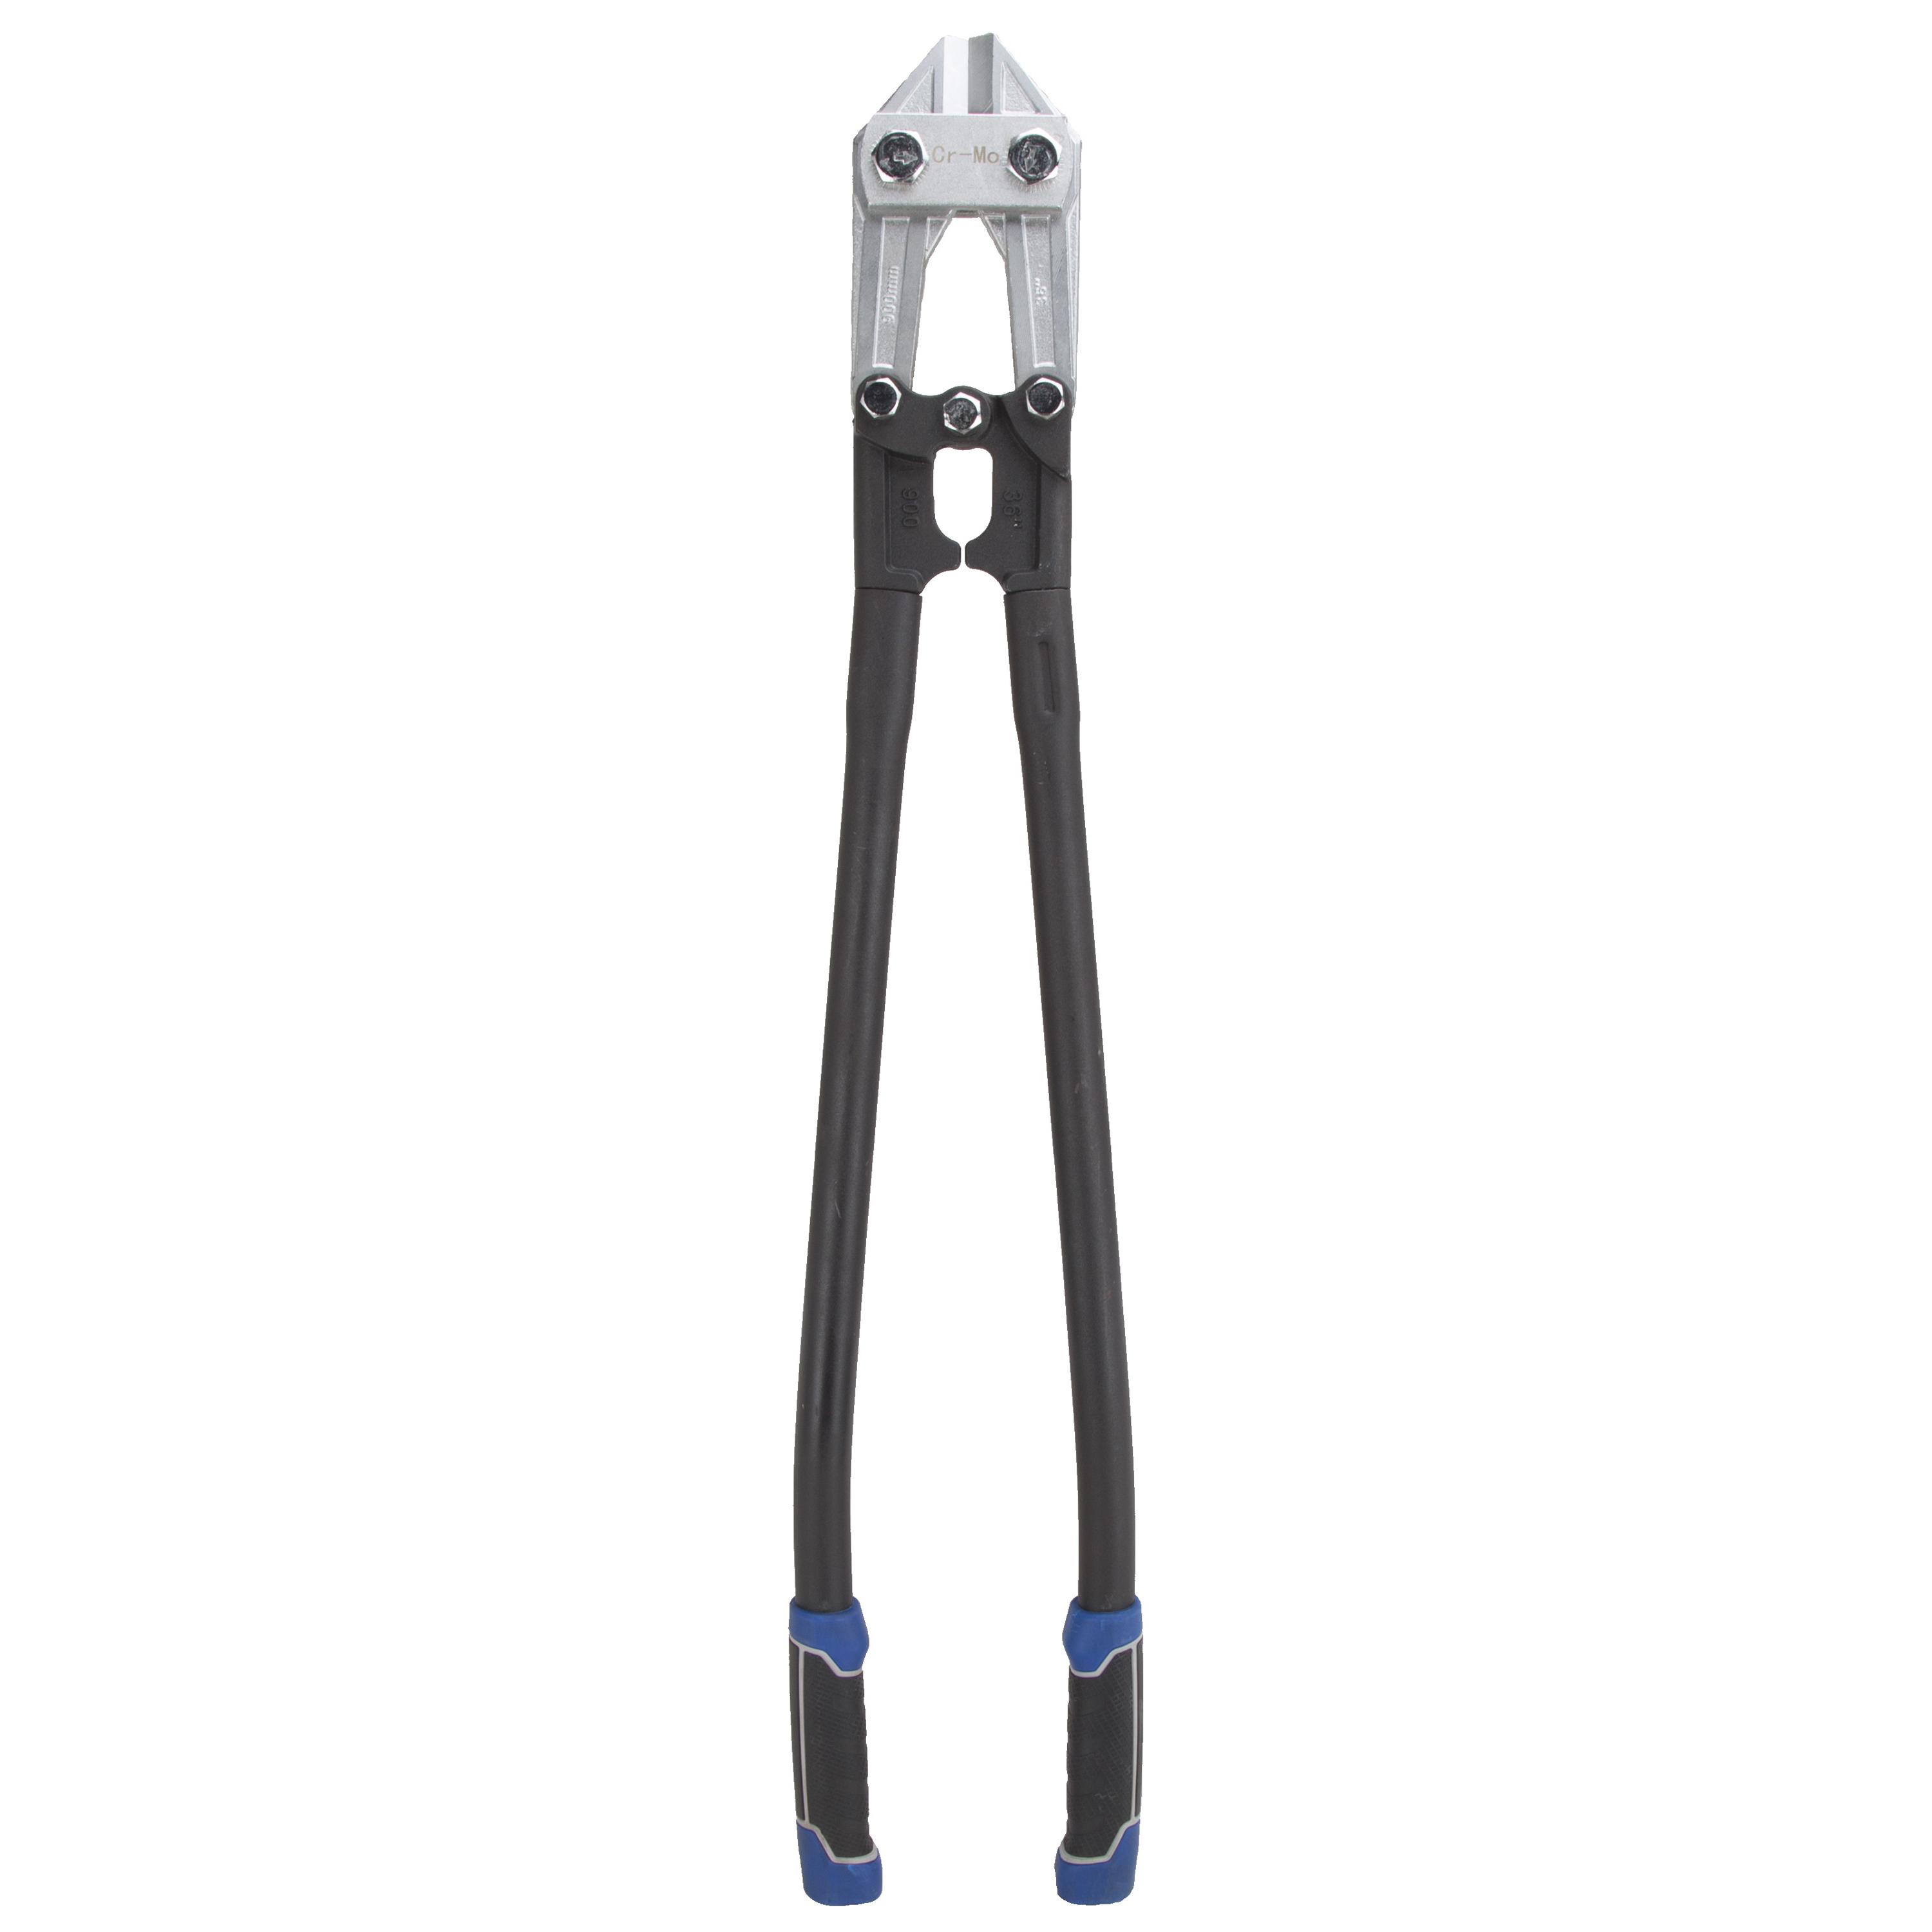 JL-WD-0636 Bolt Cutter, 10 mm Cutting Capacity, Chrome-Molybdenum Steel Jaw, 36 in OAL, Black/Blue Handle